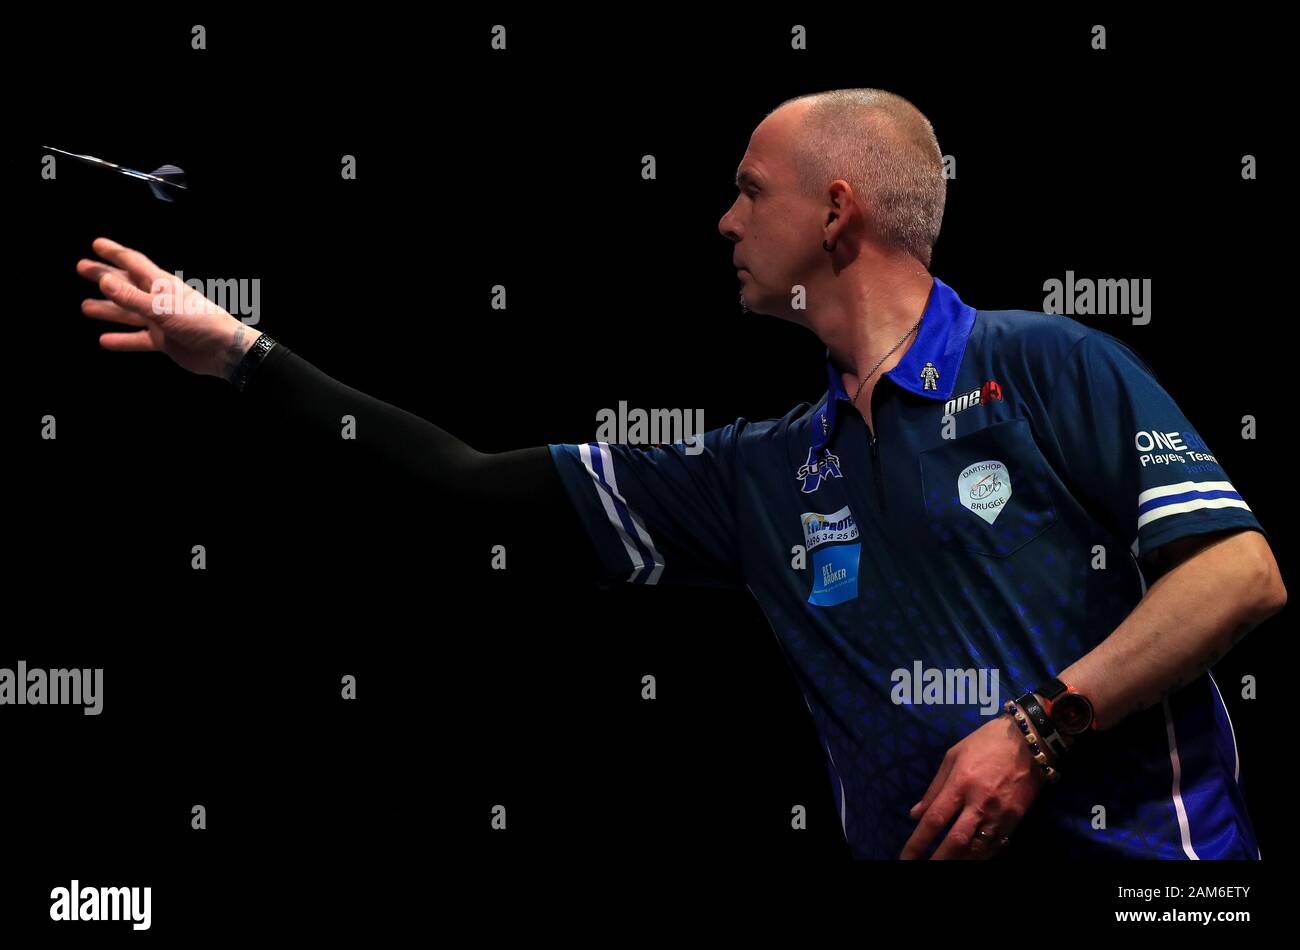 Mario Vandenbogaerde in action during day eight of the BDO World Professional Darts Championships 2020 at The O2, London. Stock Photo